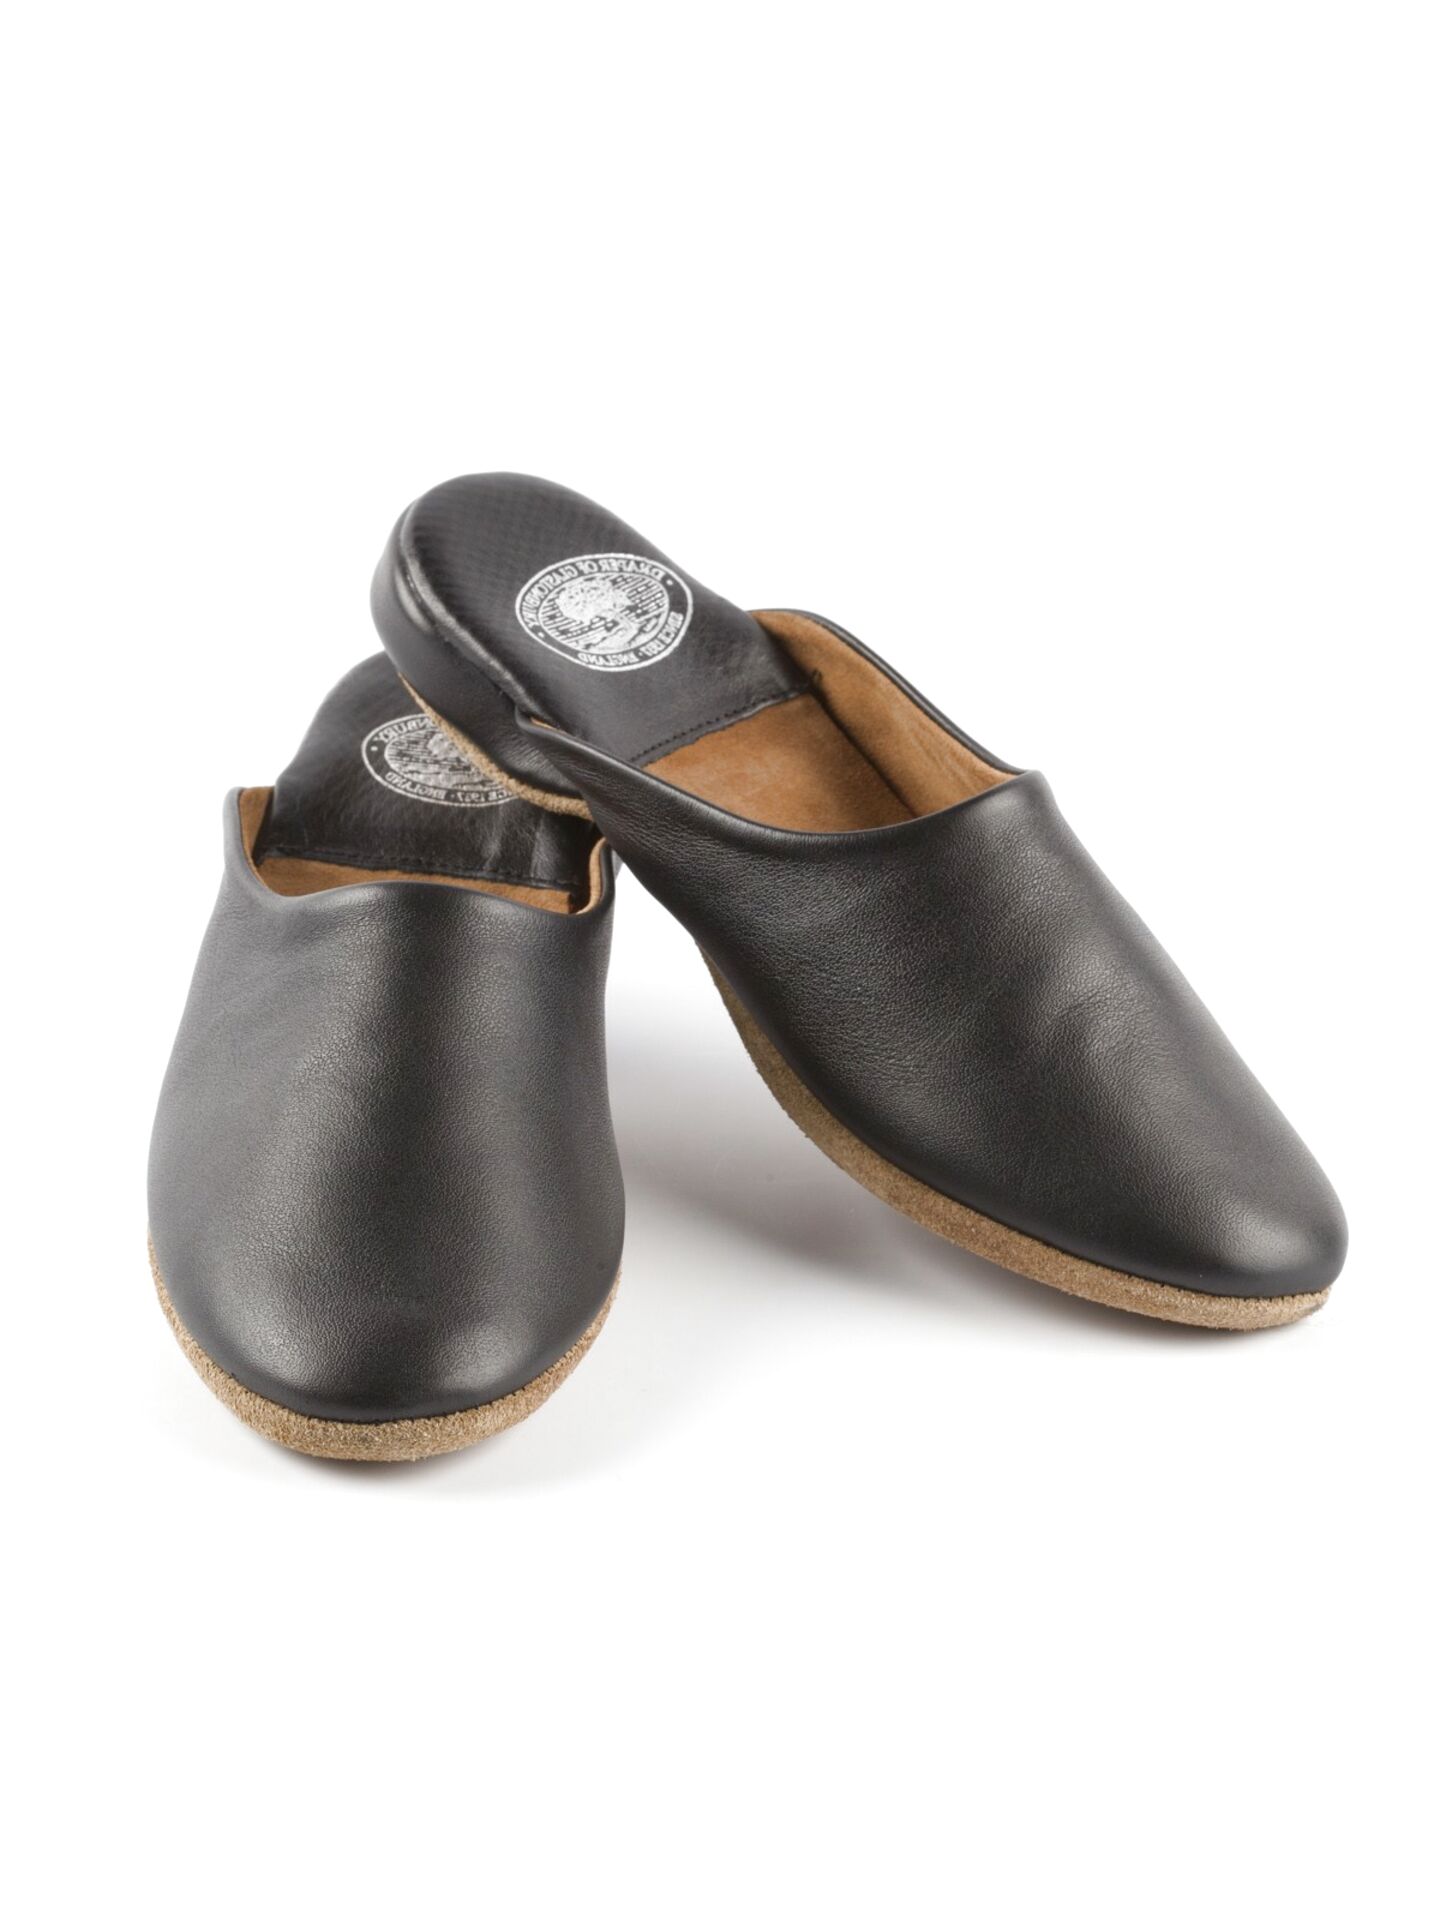 womens leather mule slippers uk